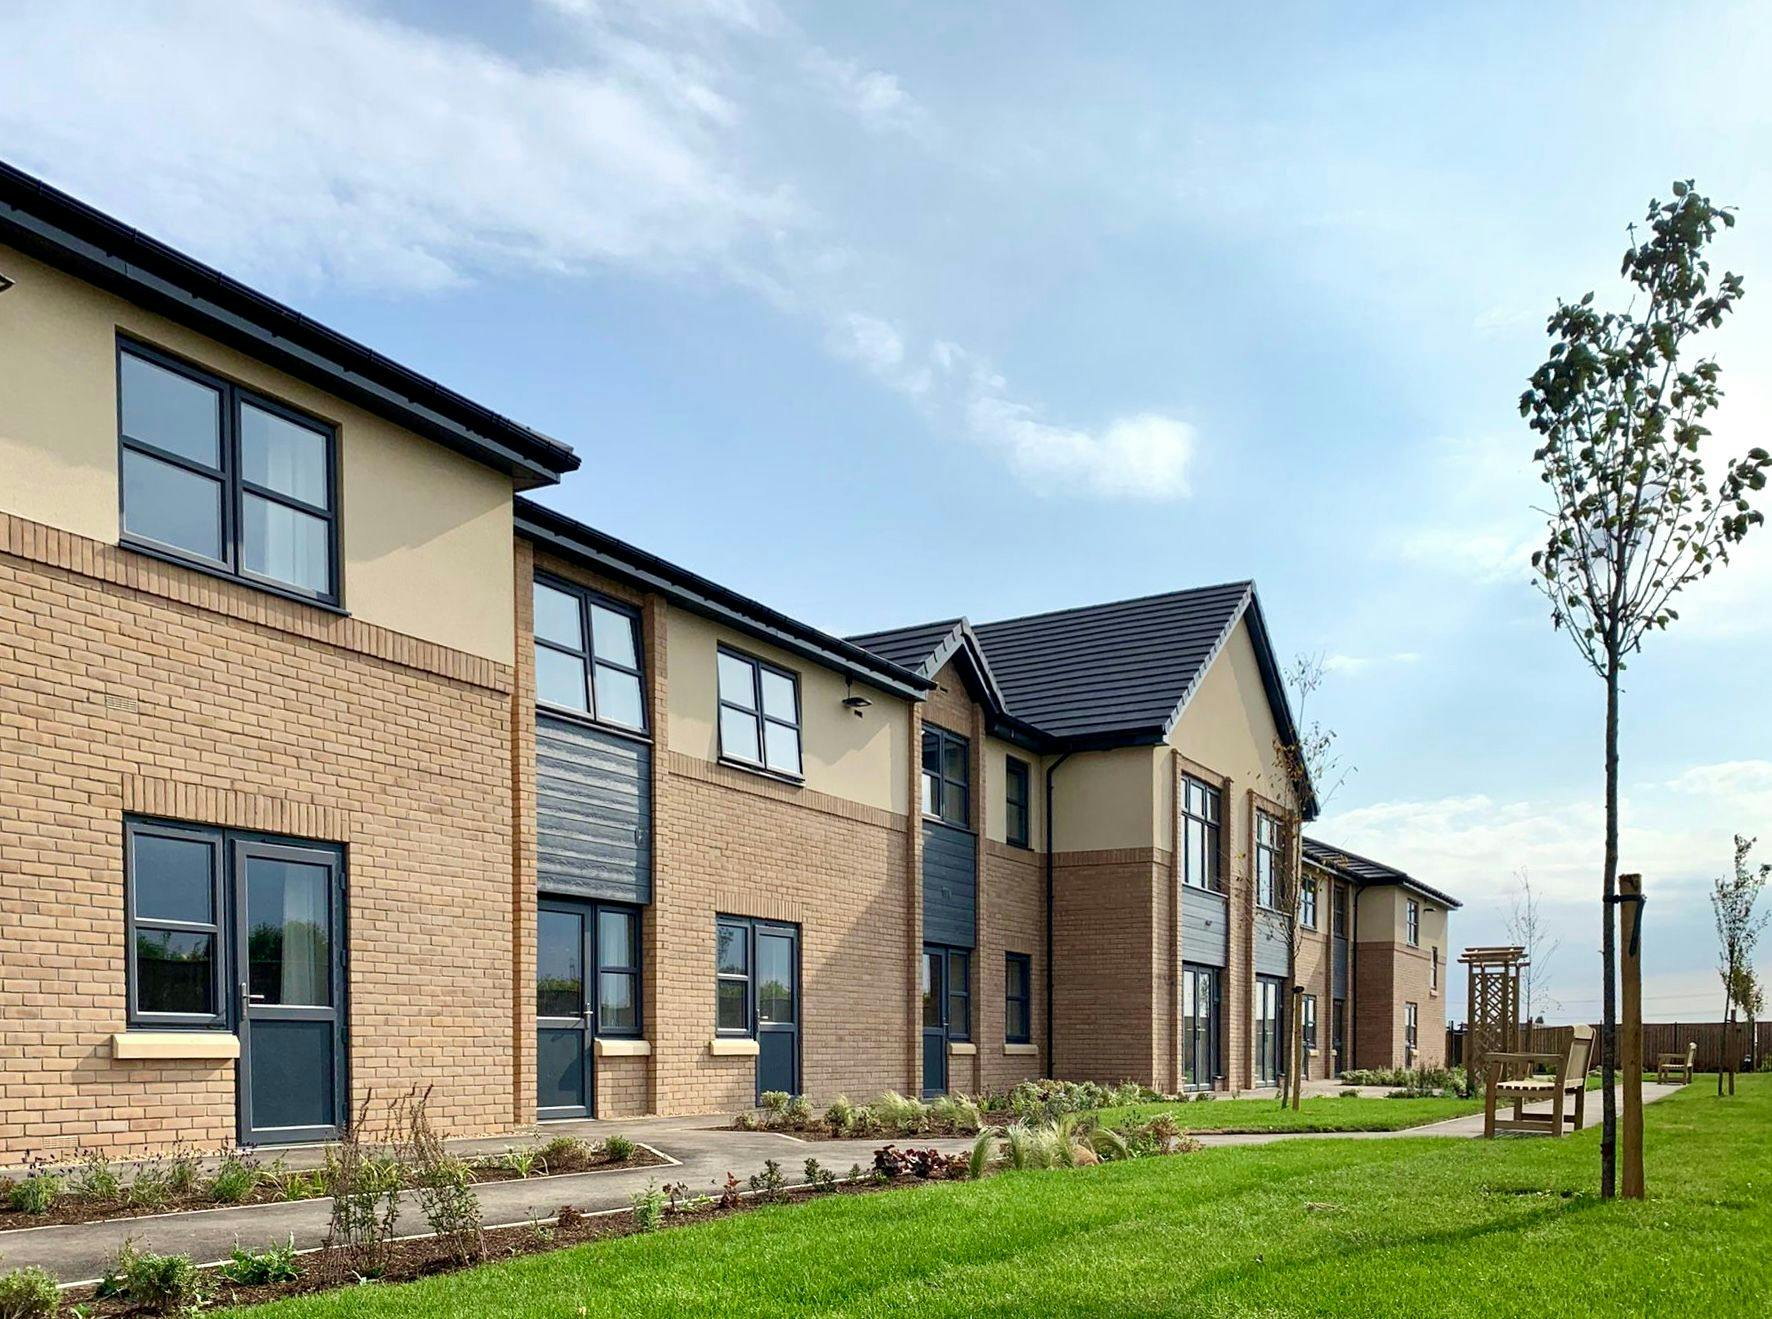 Exterior of Holbeach Meadow care home in Holbeach, Lincolnshire